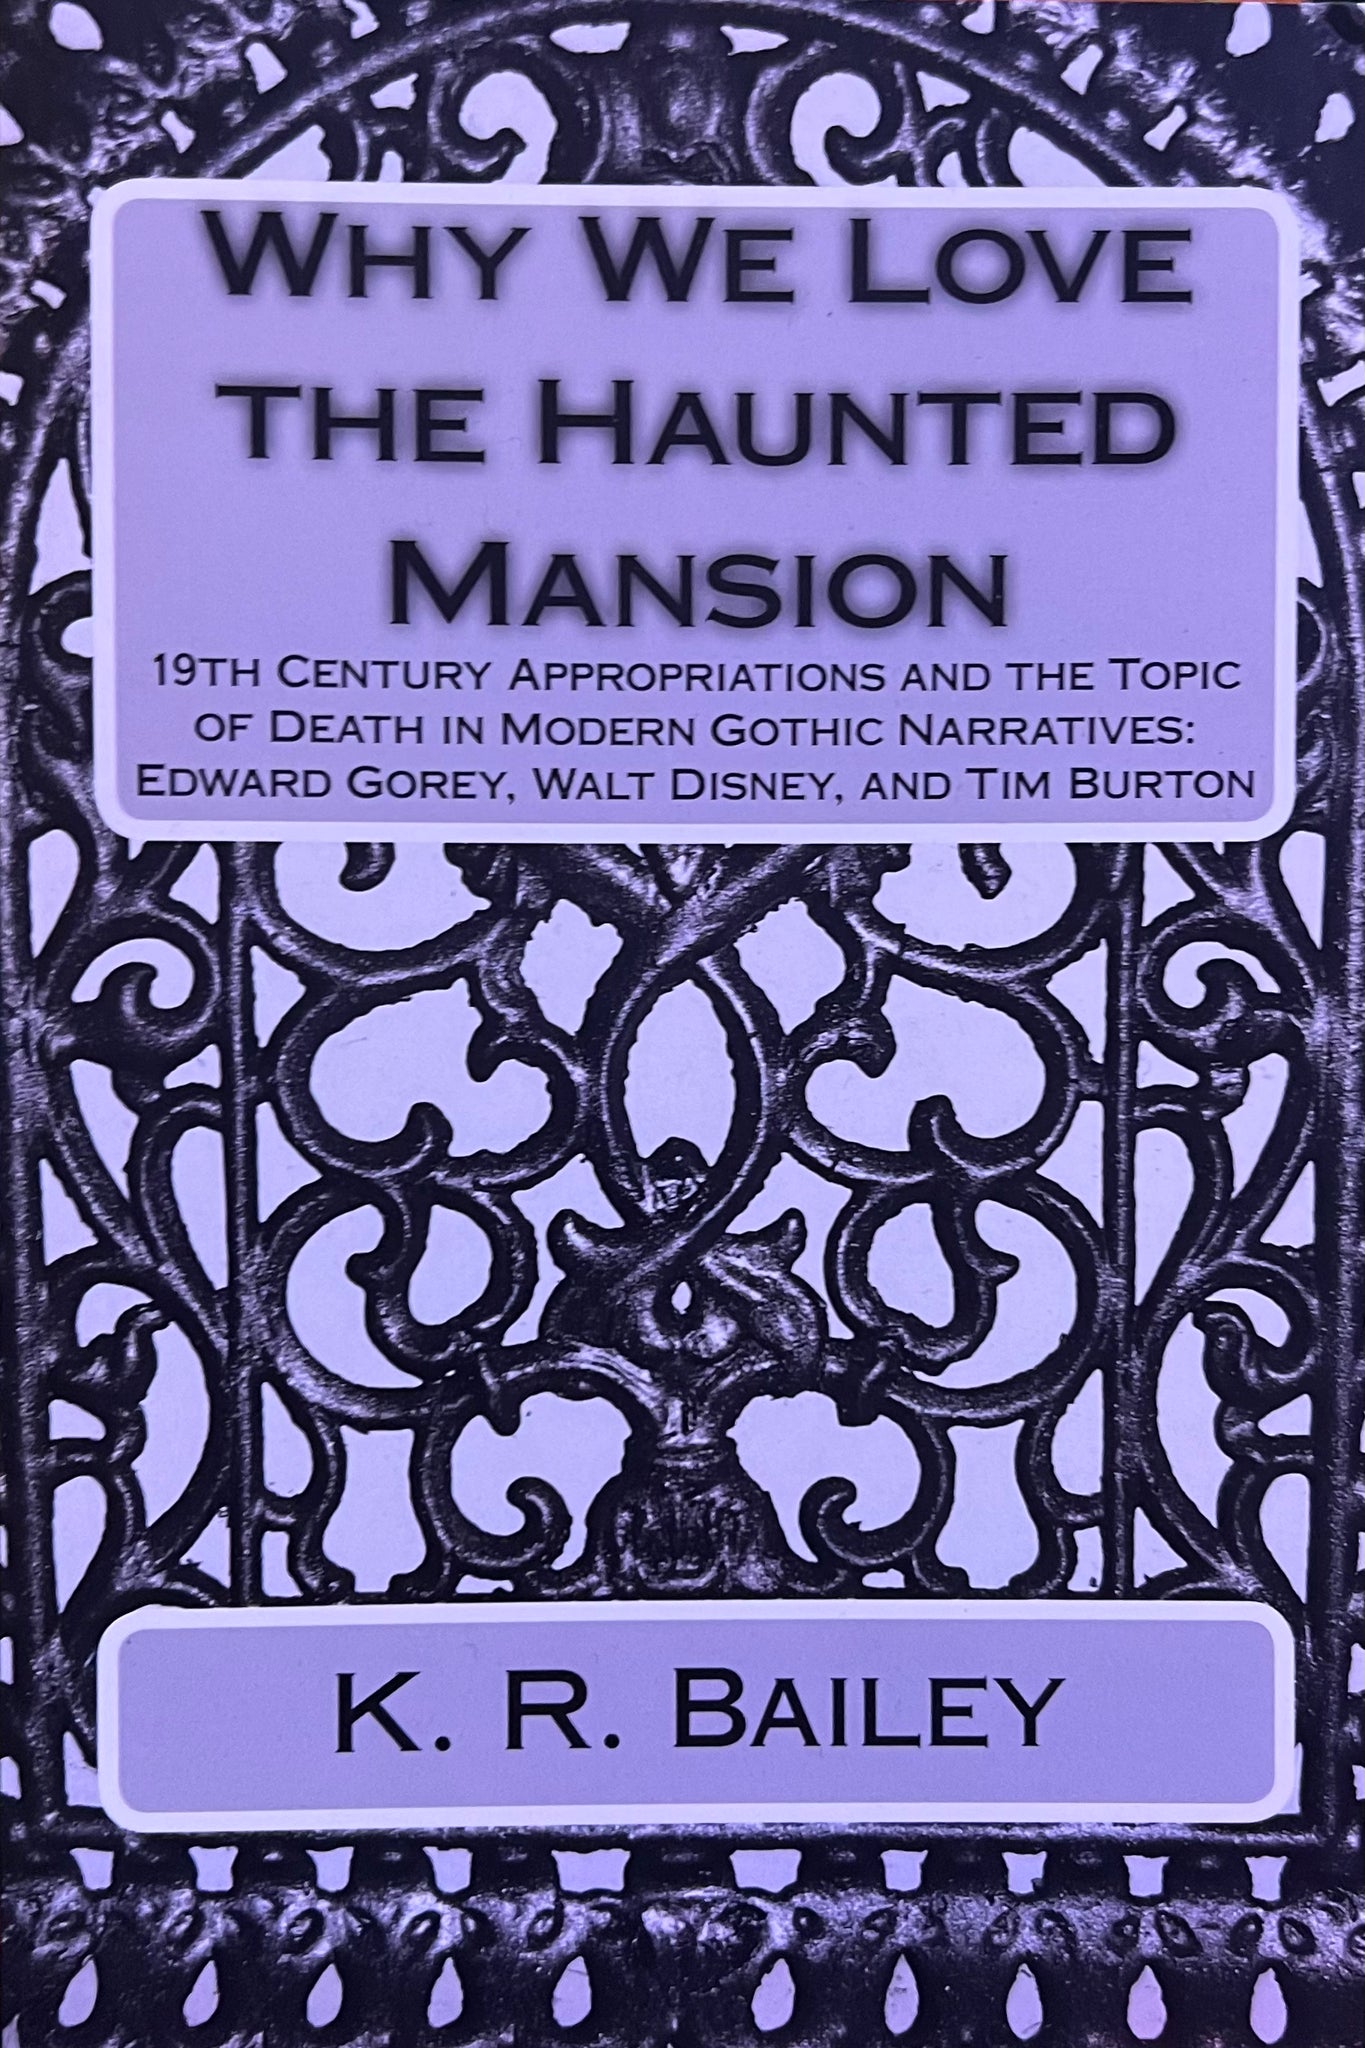 Why We Love the Haunted Mansion: 19th Century Appropriations and the Topic of Death in Modern Gothic Narratives: Edward Gorey, Walt Disney, and Tim Burton, K. R. Bailey